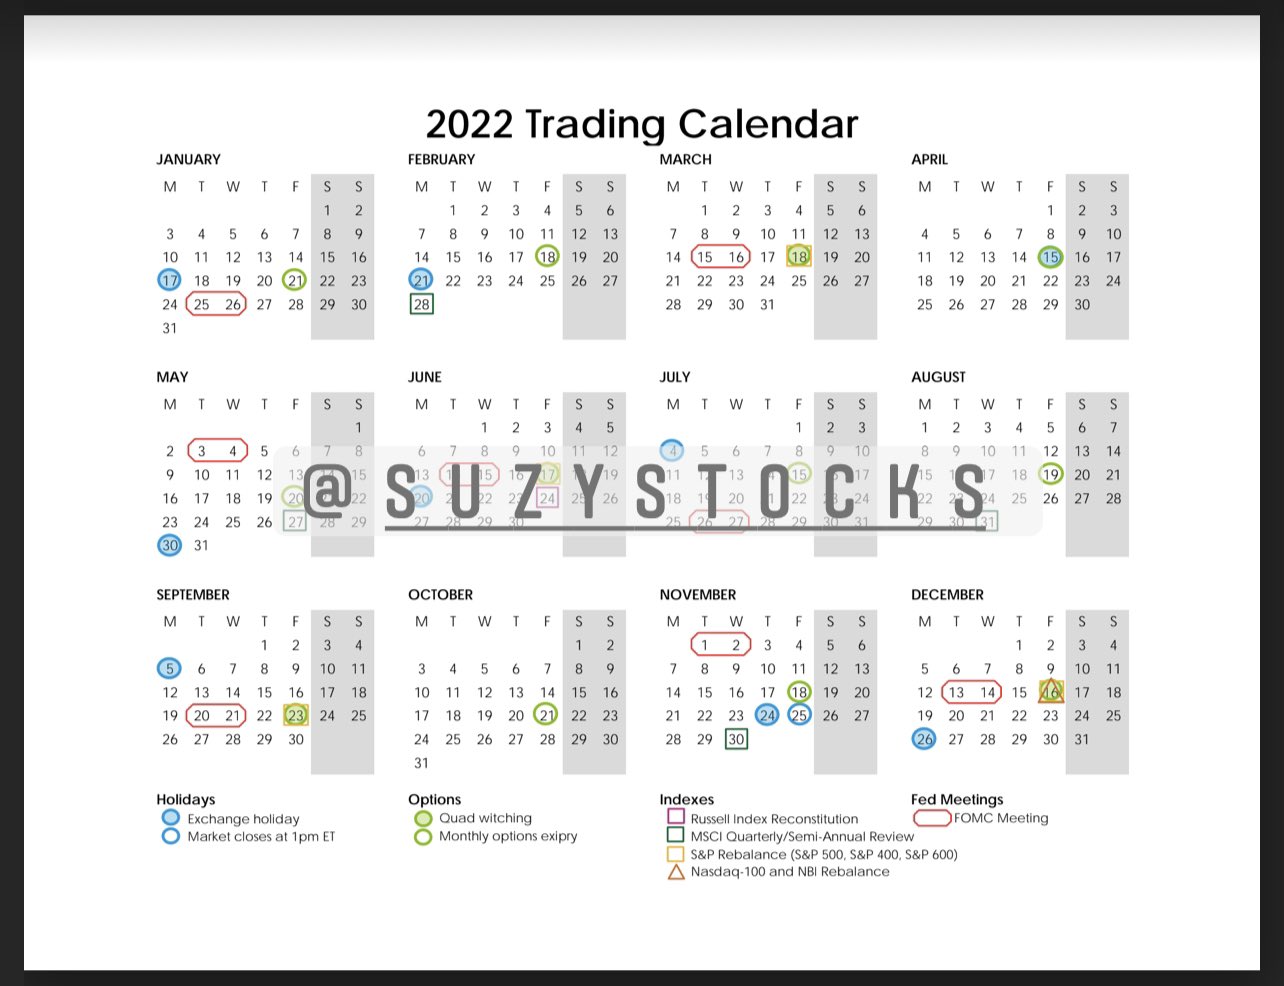 Fomc Calendar 2022 Suzy On Twitter: "Trading Calendar Updated For 2022. Has Market Holidays,  Option Expirations, Index Rebalancing, Fomc Meetings. Download It, Save It,  Share It, Print It, Post It. Clean Version -> Https://T.co/Ft31Zievzs  Https://T.co/I0L4Wsnjy5" /